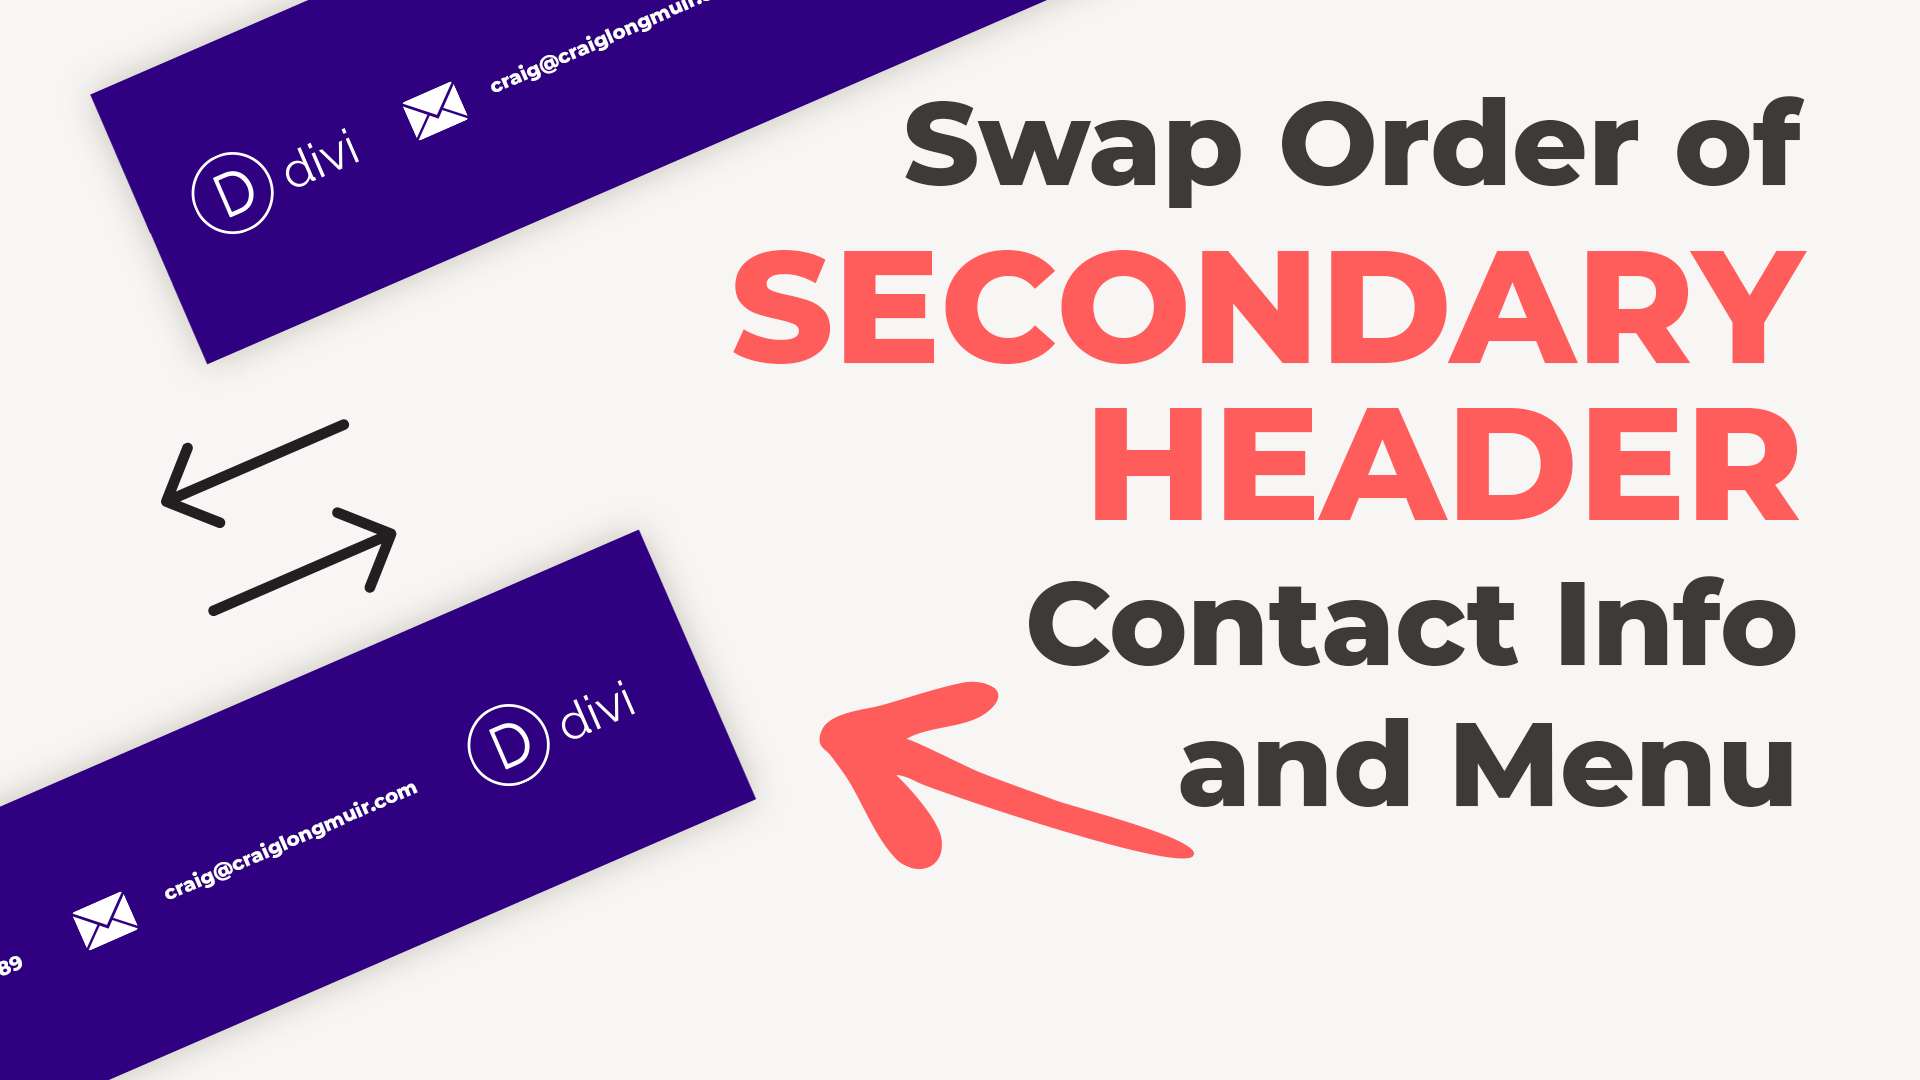 Swap the Order of the Secondary Header Contact Info and Menu